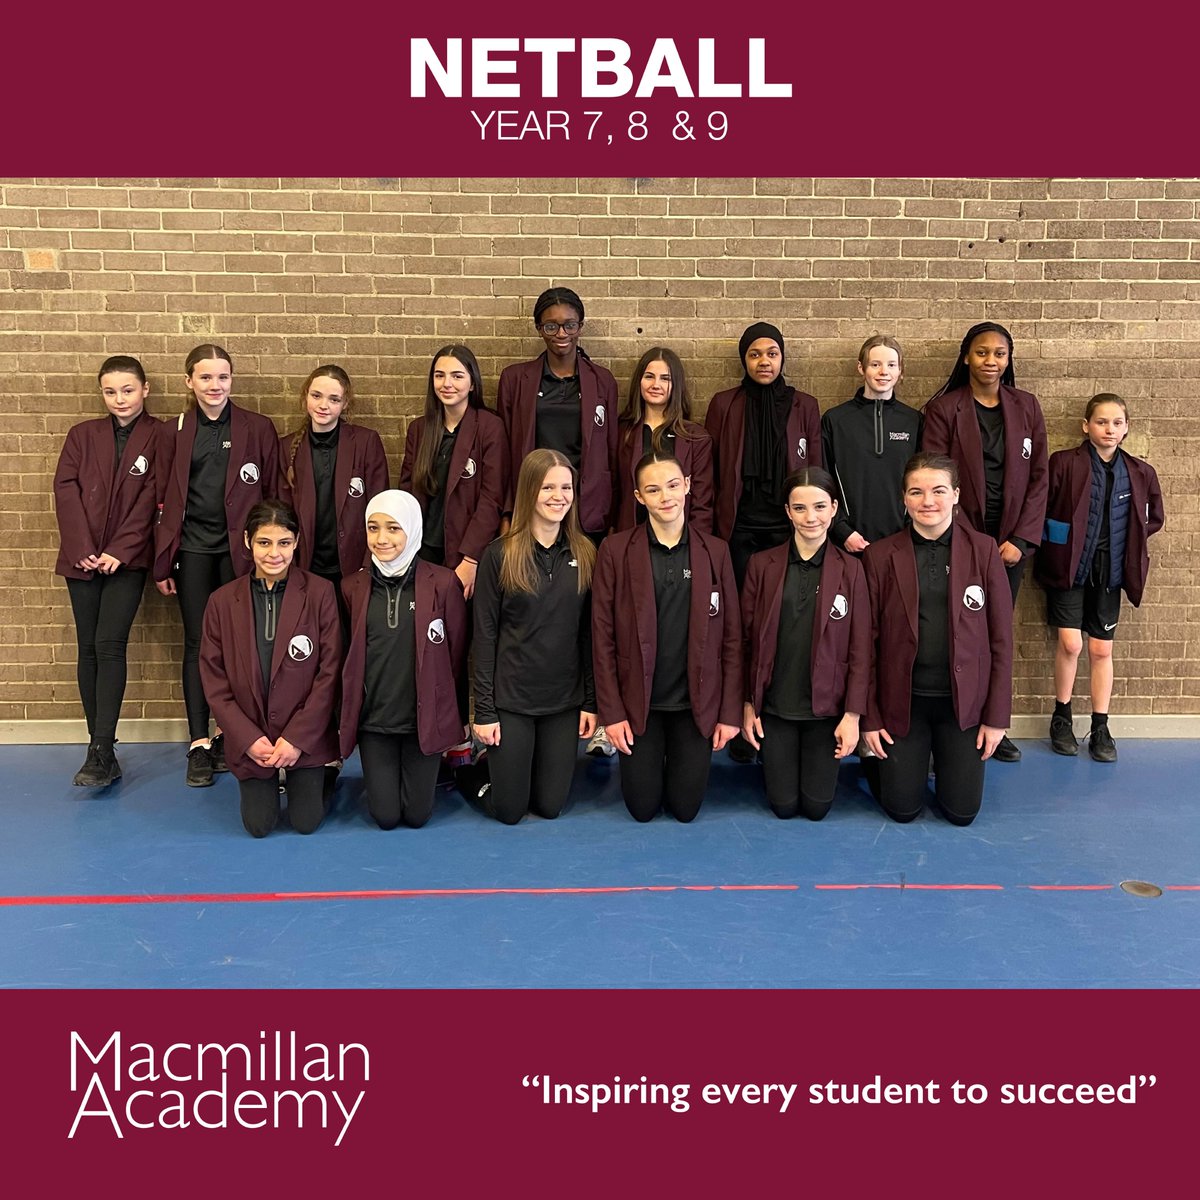 Just yesterday Y7, 8 and 9 students participated in a Grangetown Netball Open Day. Here the students were taken around the brilliant facilities they have to offer and they experienced netball games with some of their coaches. A big well done to all involved - it was a great day!